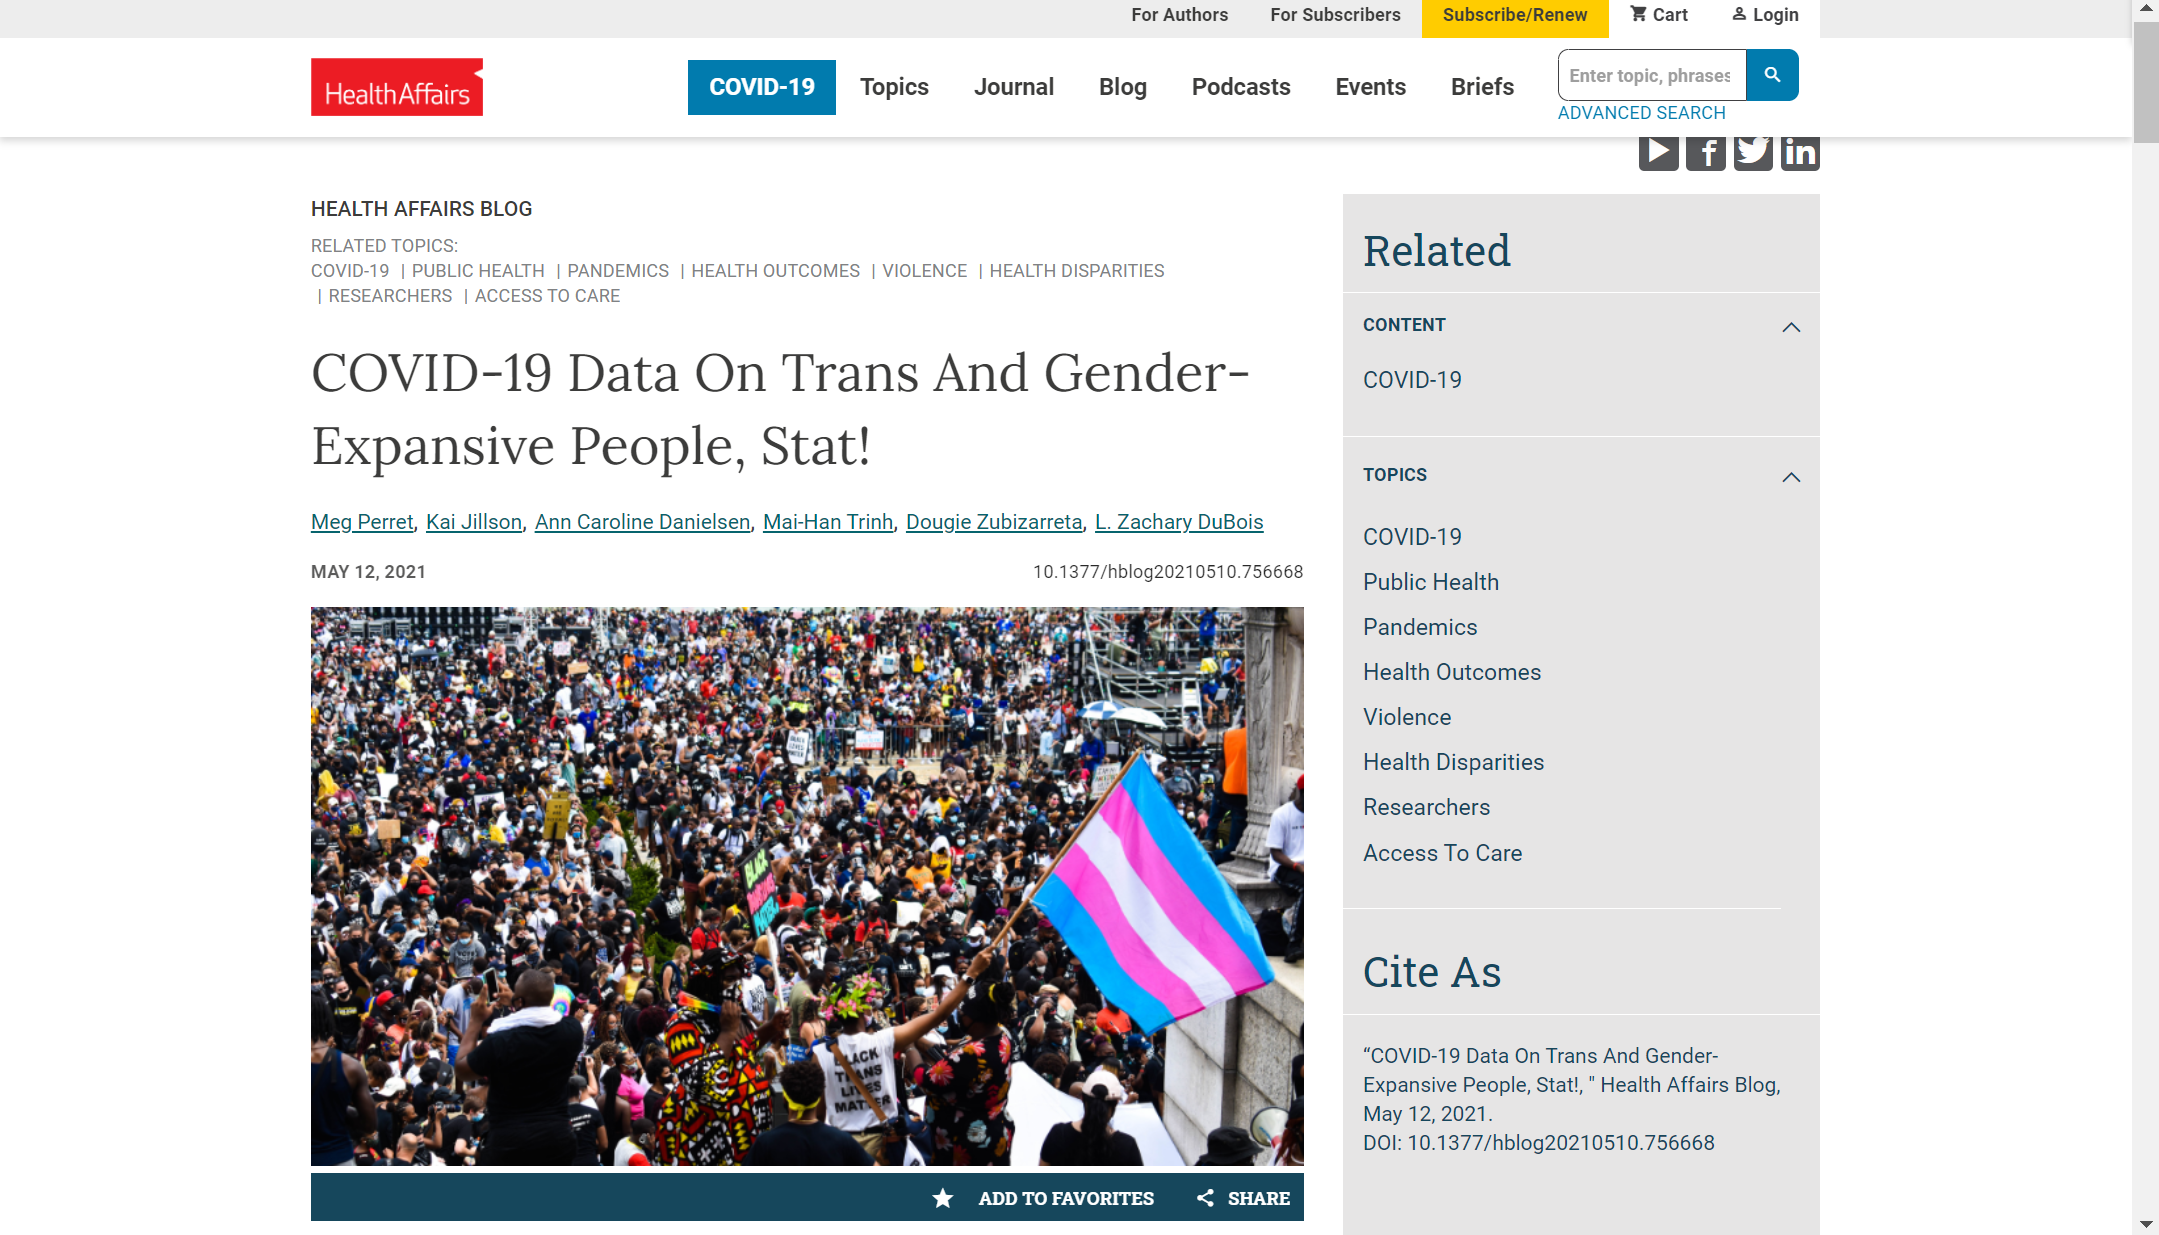 COVID-19 Data On Trans And Gender-Expansive People, Stat!